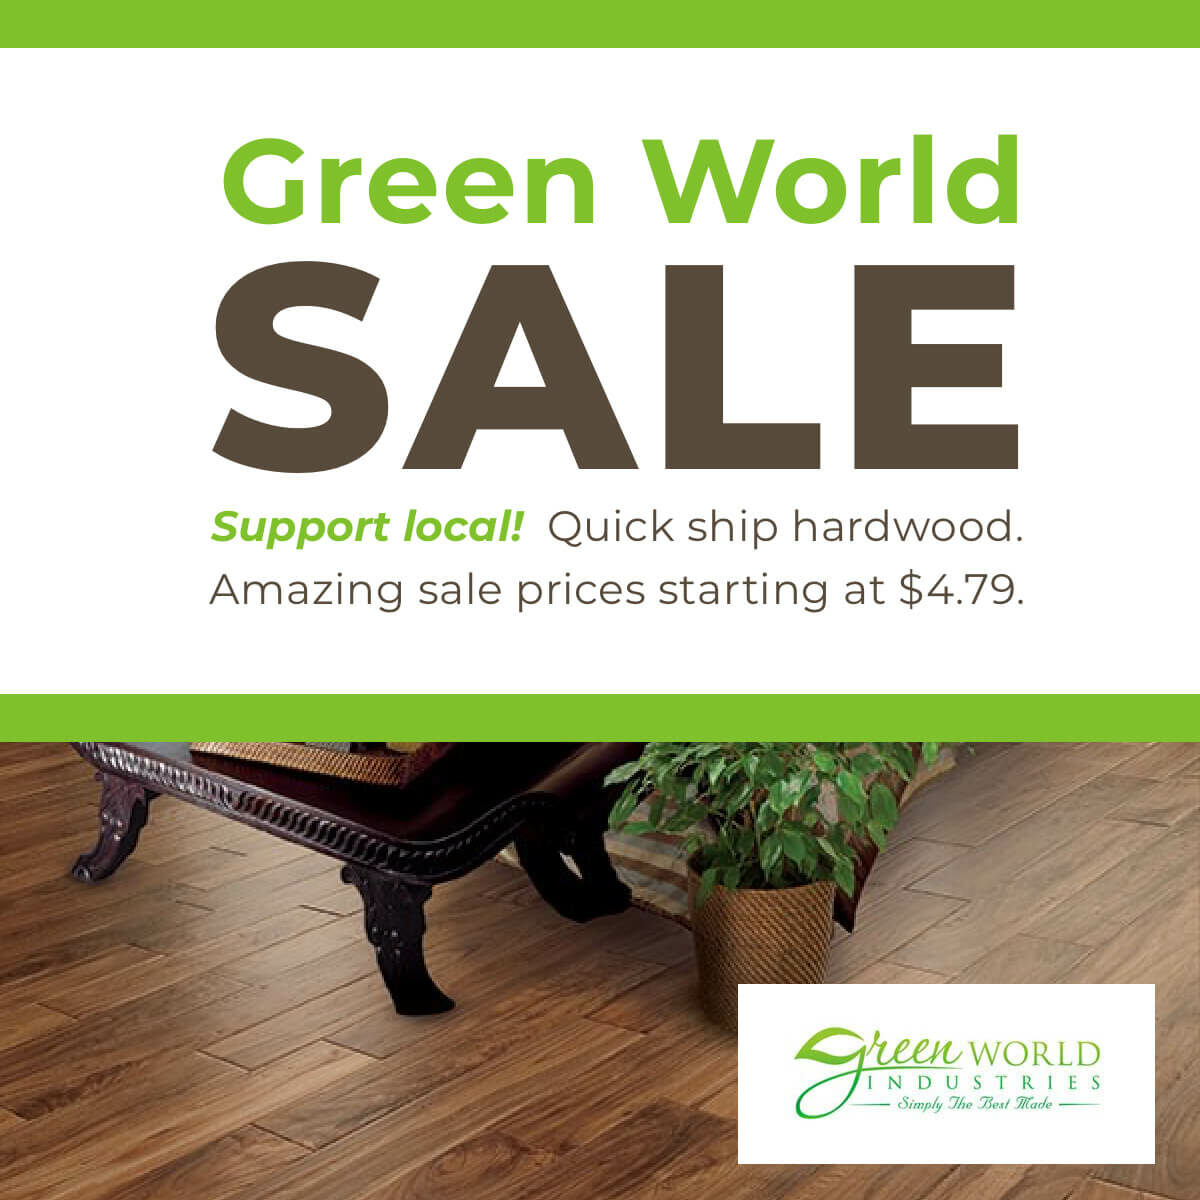 Green World Sale - Support Local! Quick Ship Hardwood. Amazing Sales prices starting at $4.79